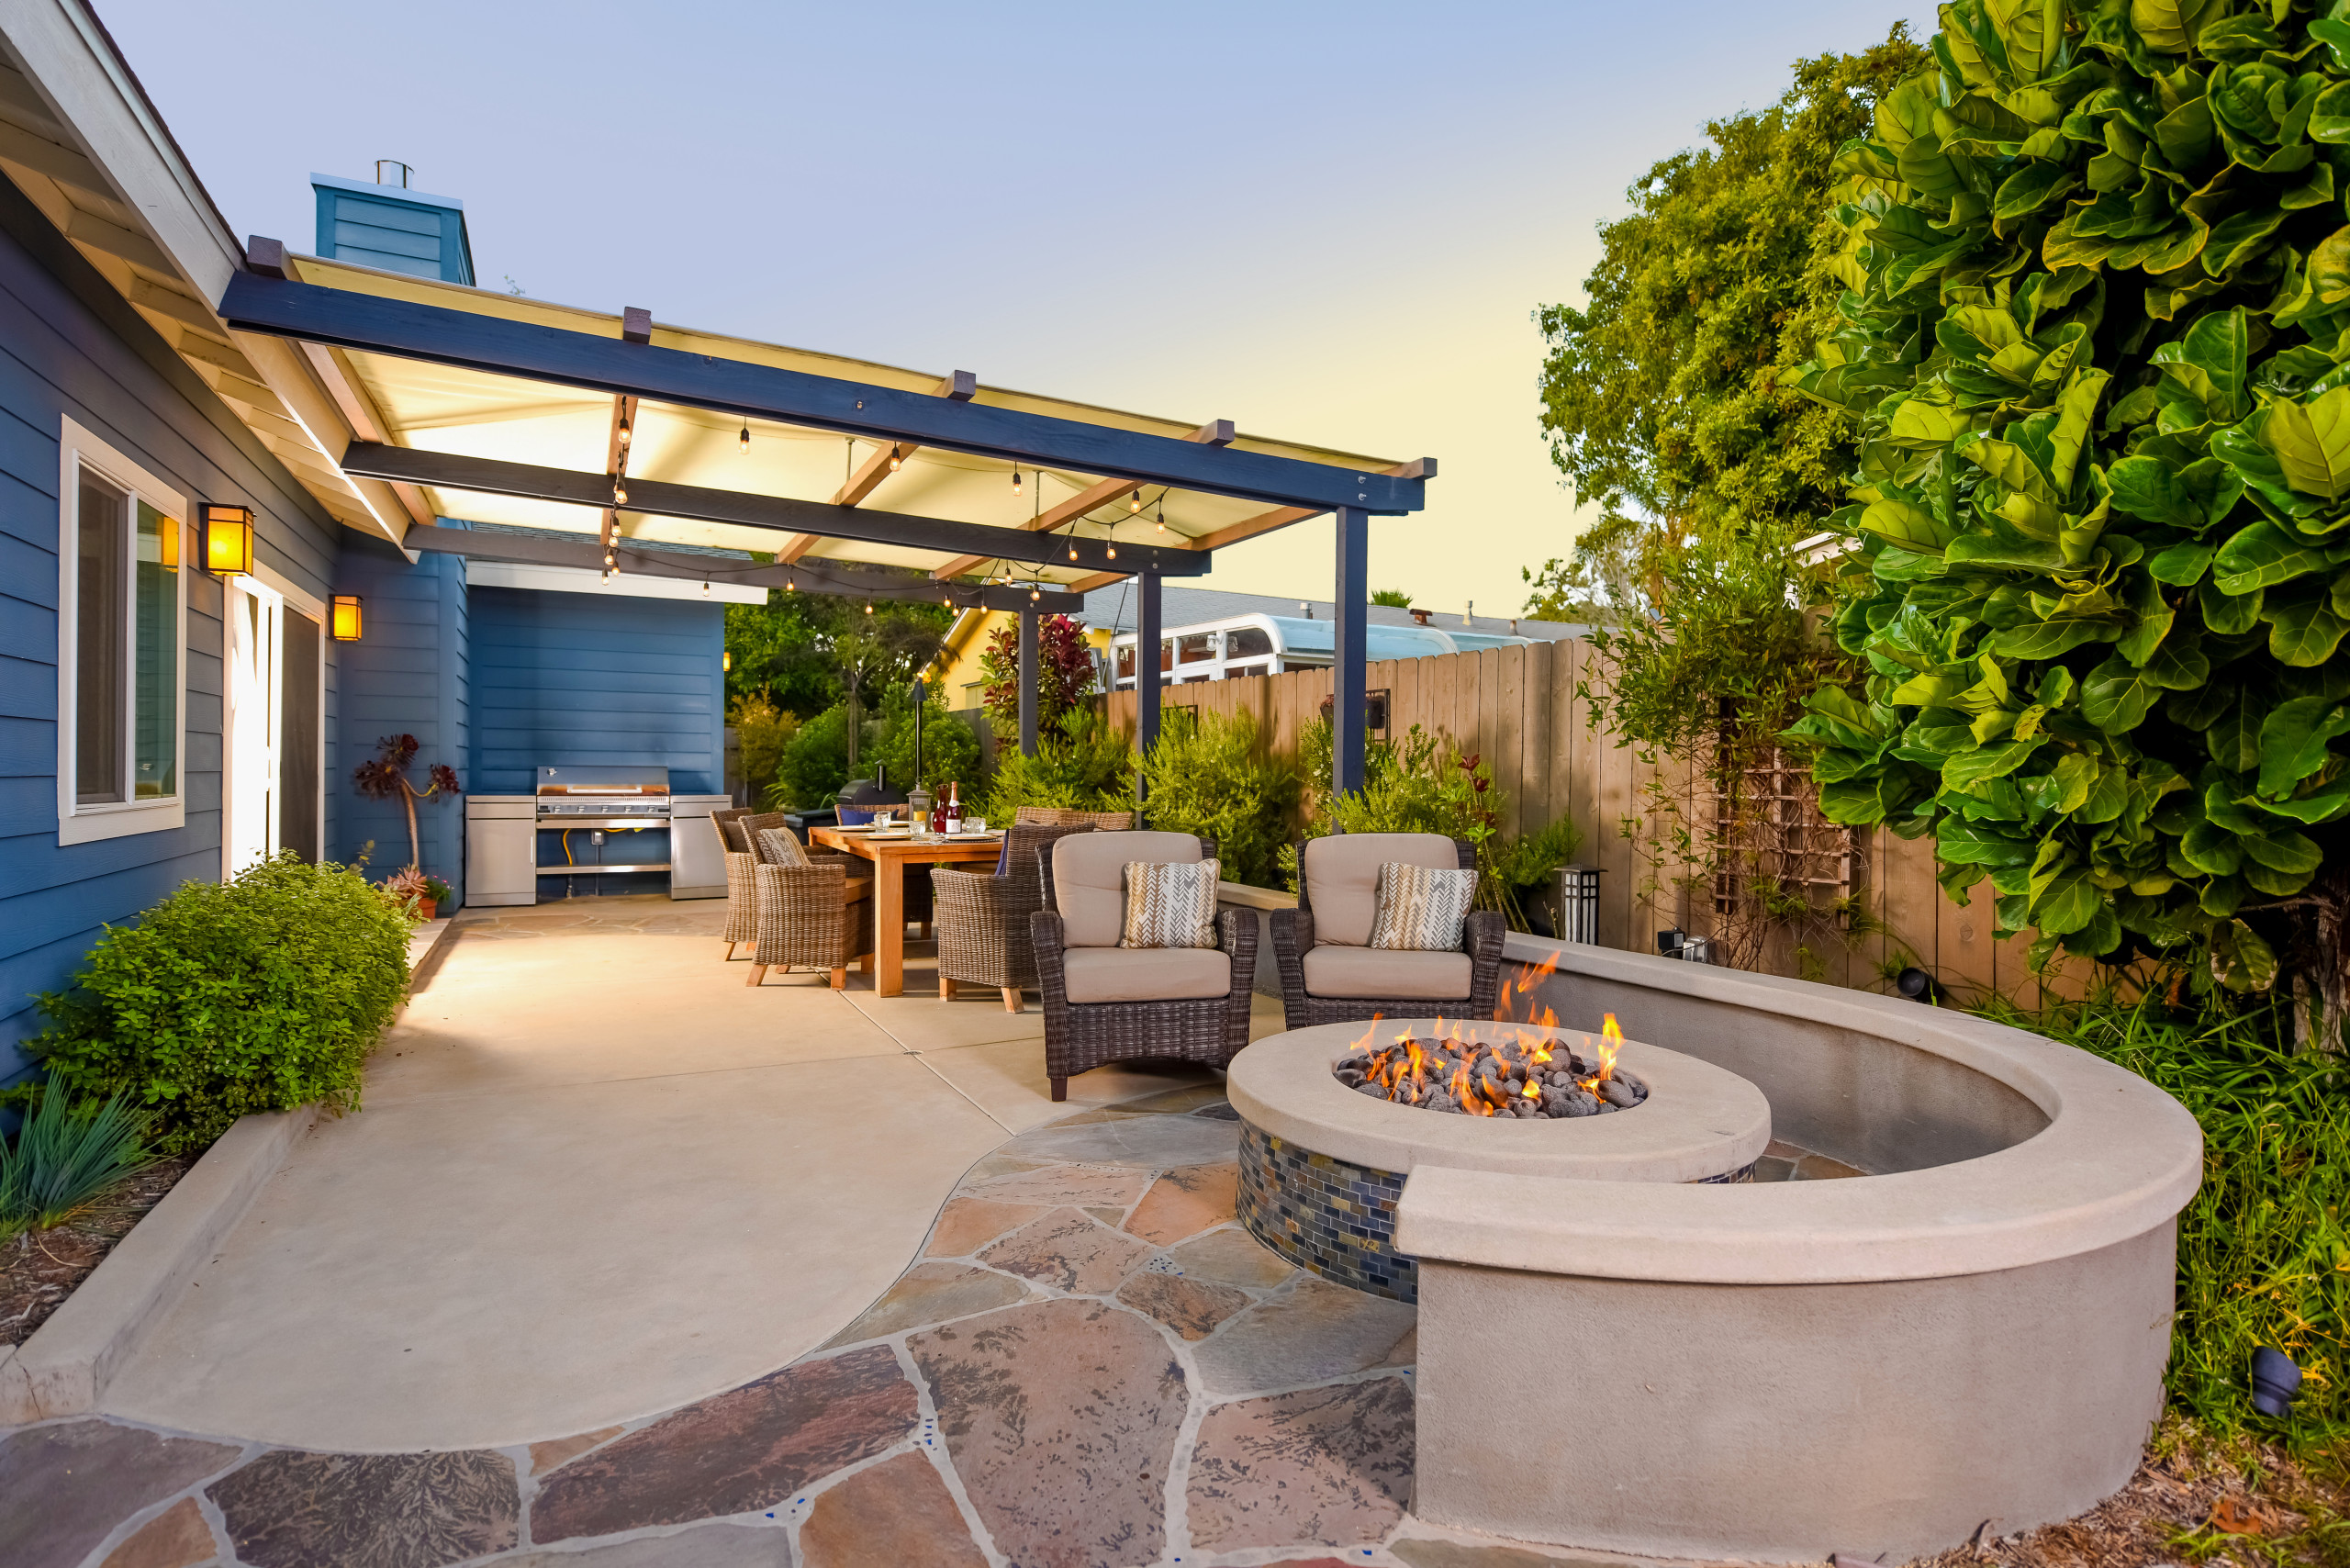 Fire pit and Lounge Area